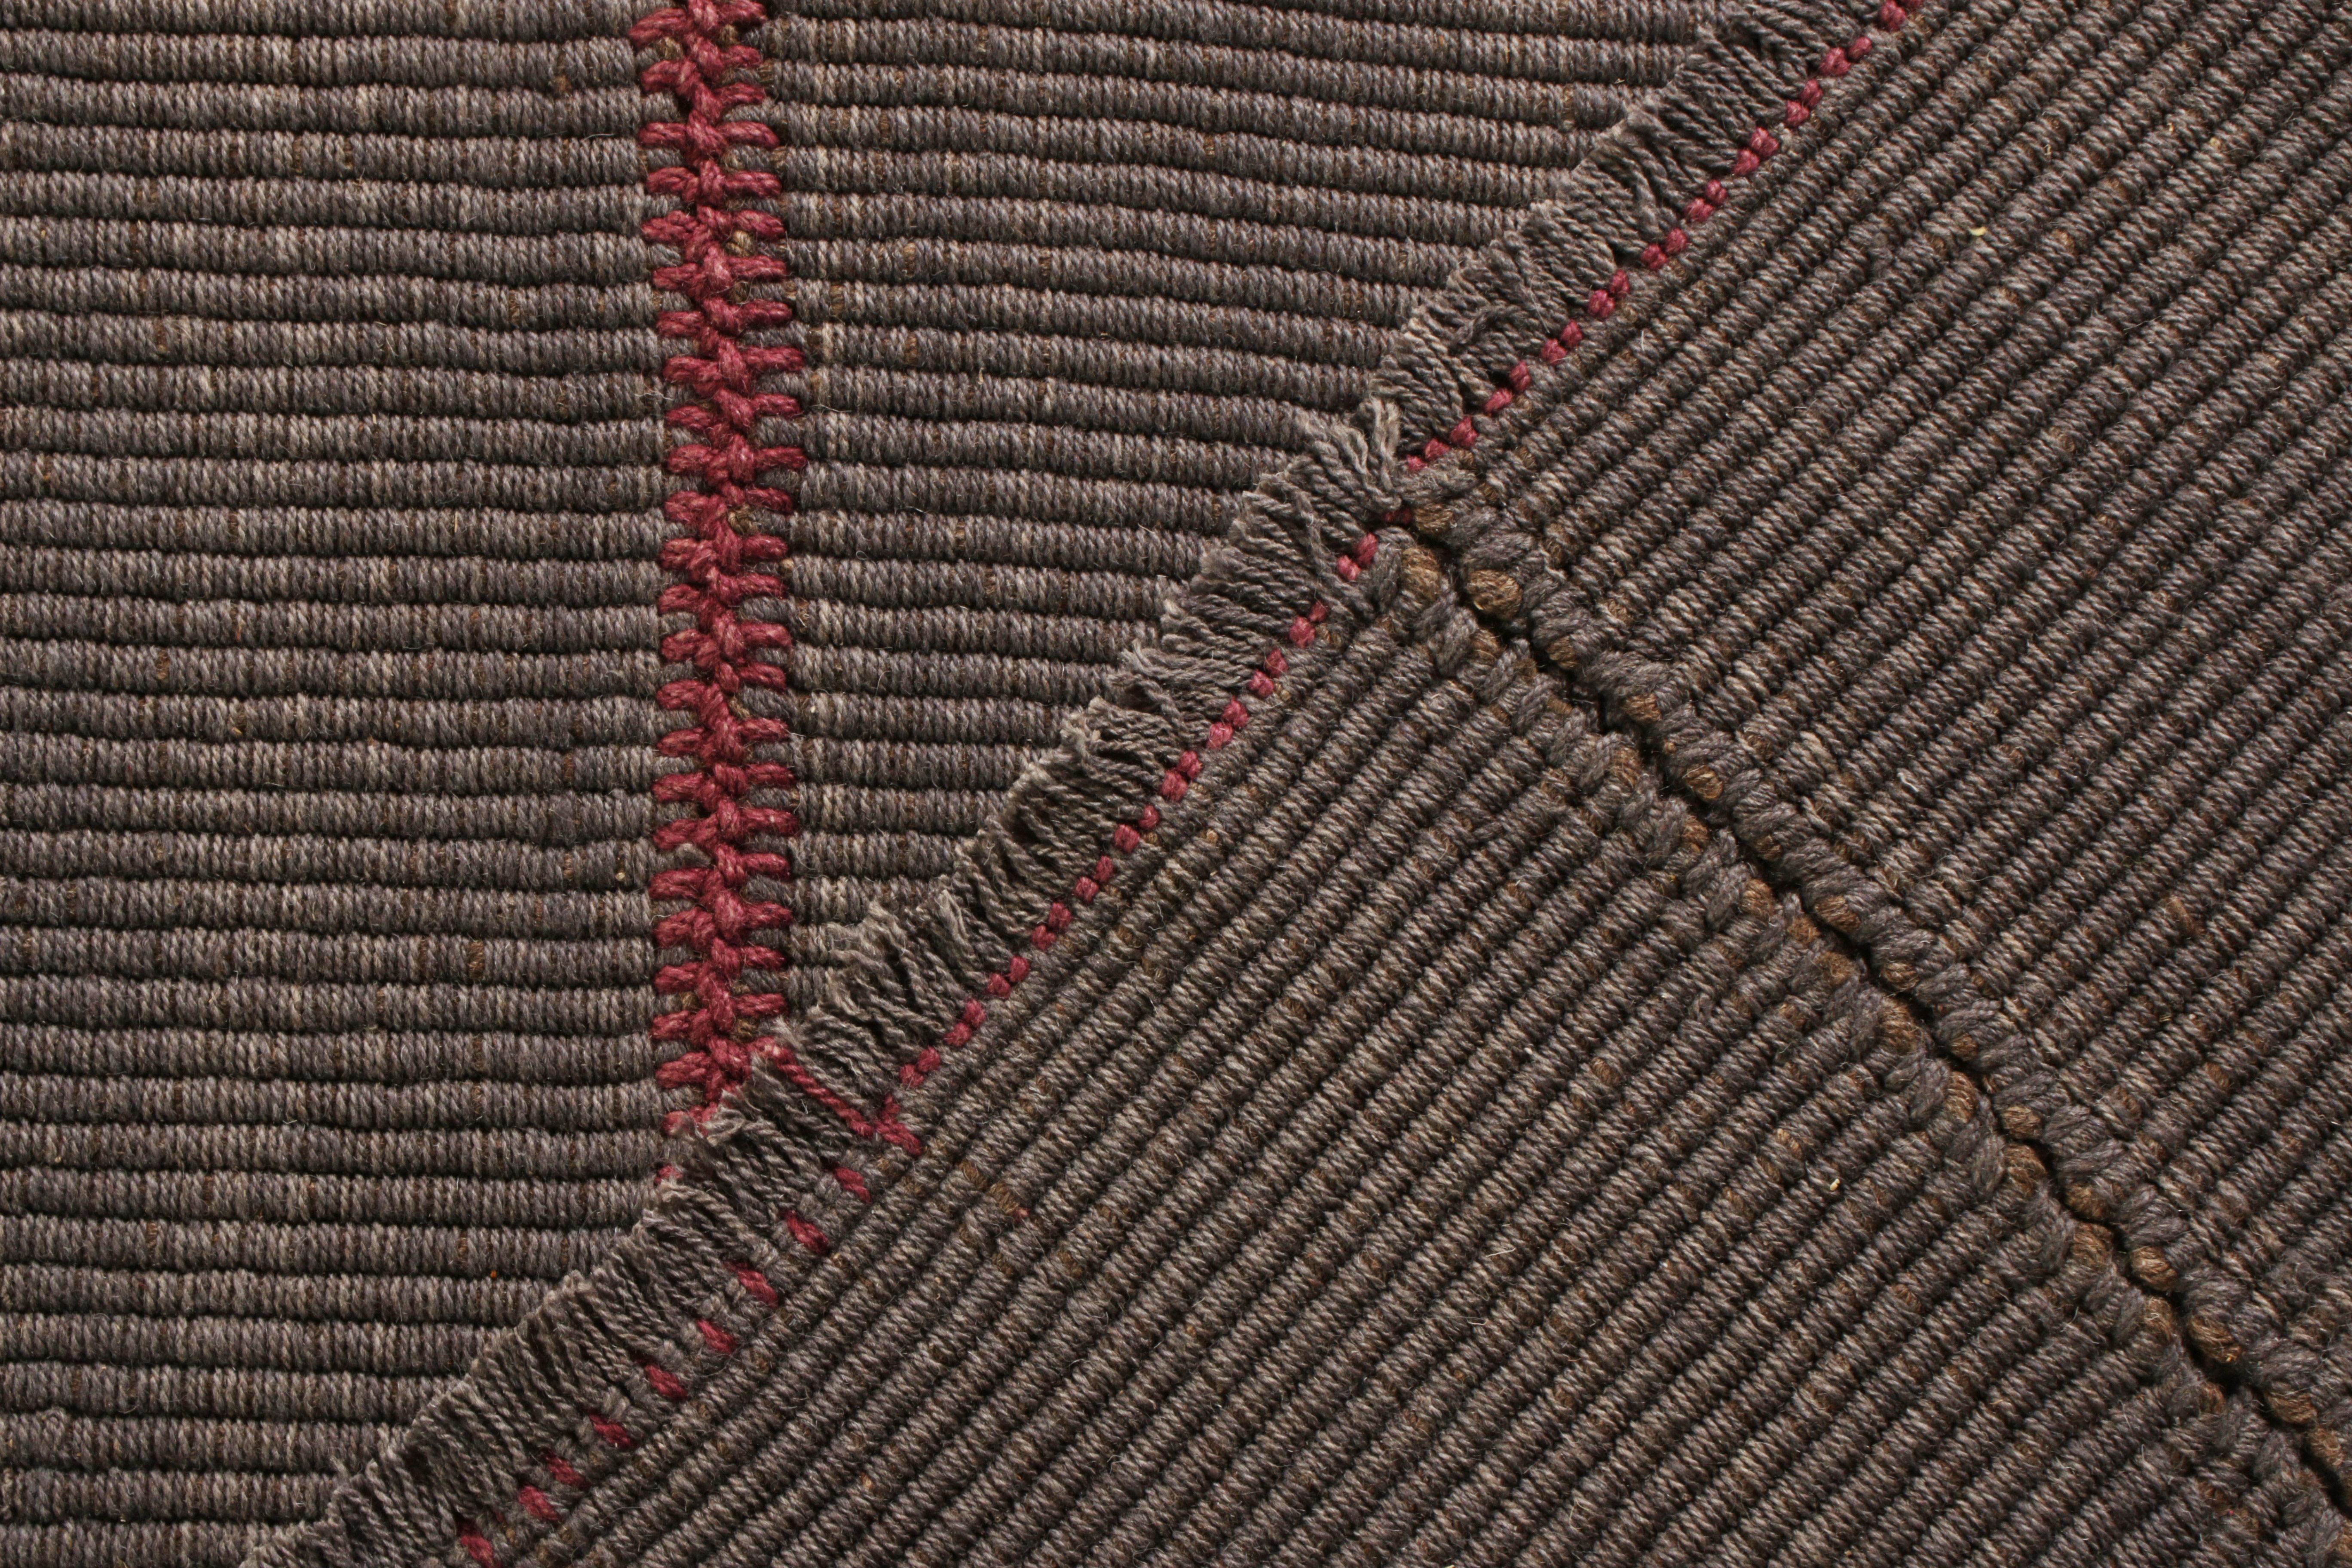 Wool Rug & Kilim’s Modern Kilim Rug in Red and Gray-Brown Striped Patterns For Sale